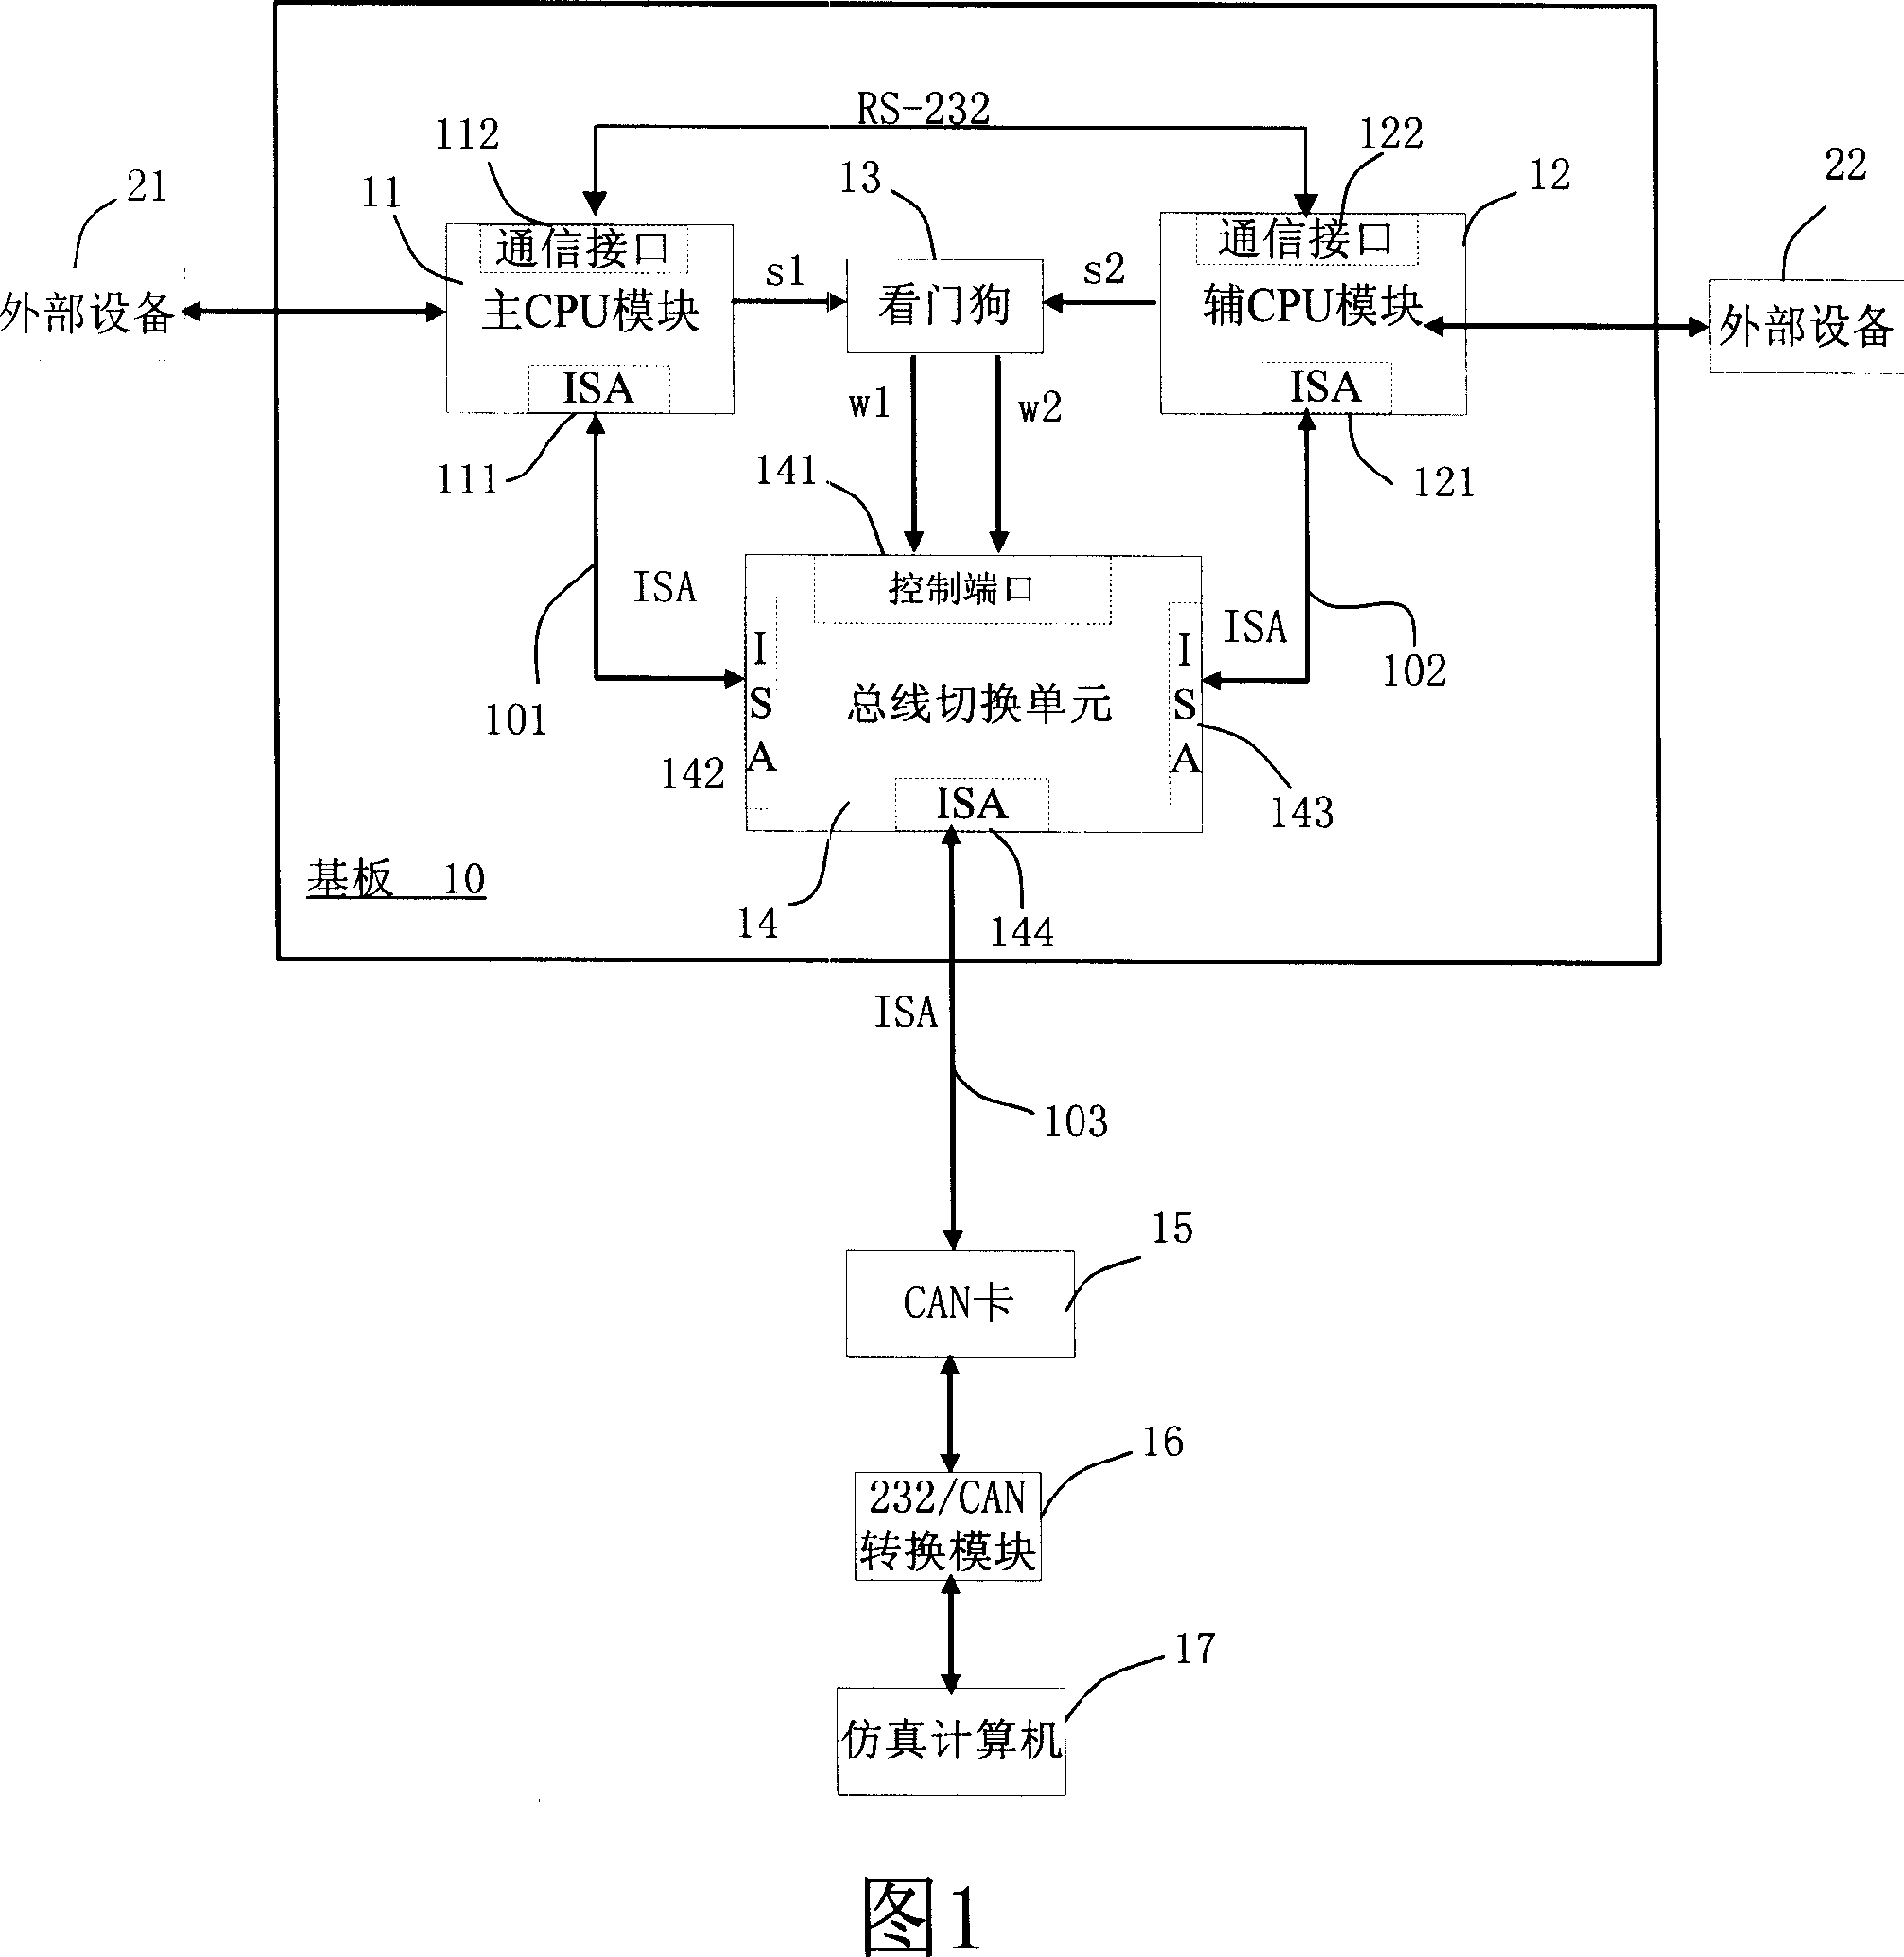 Double-machine redundancy system based on embedded CPU